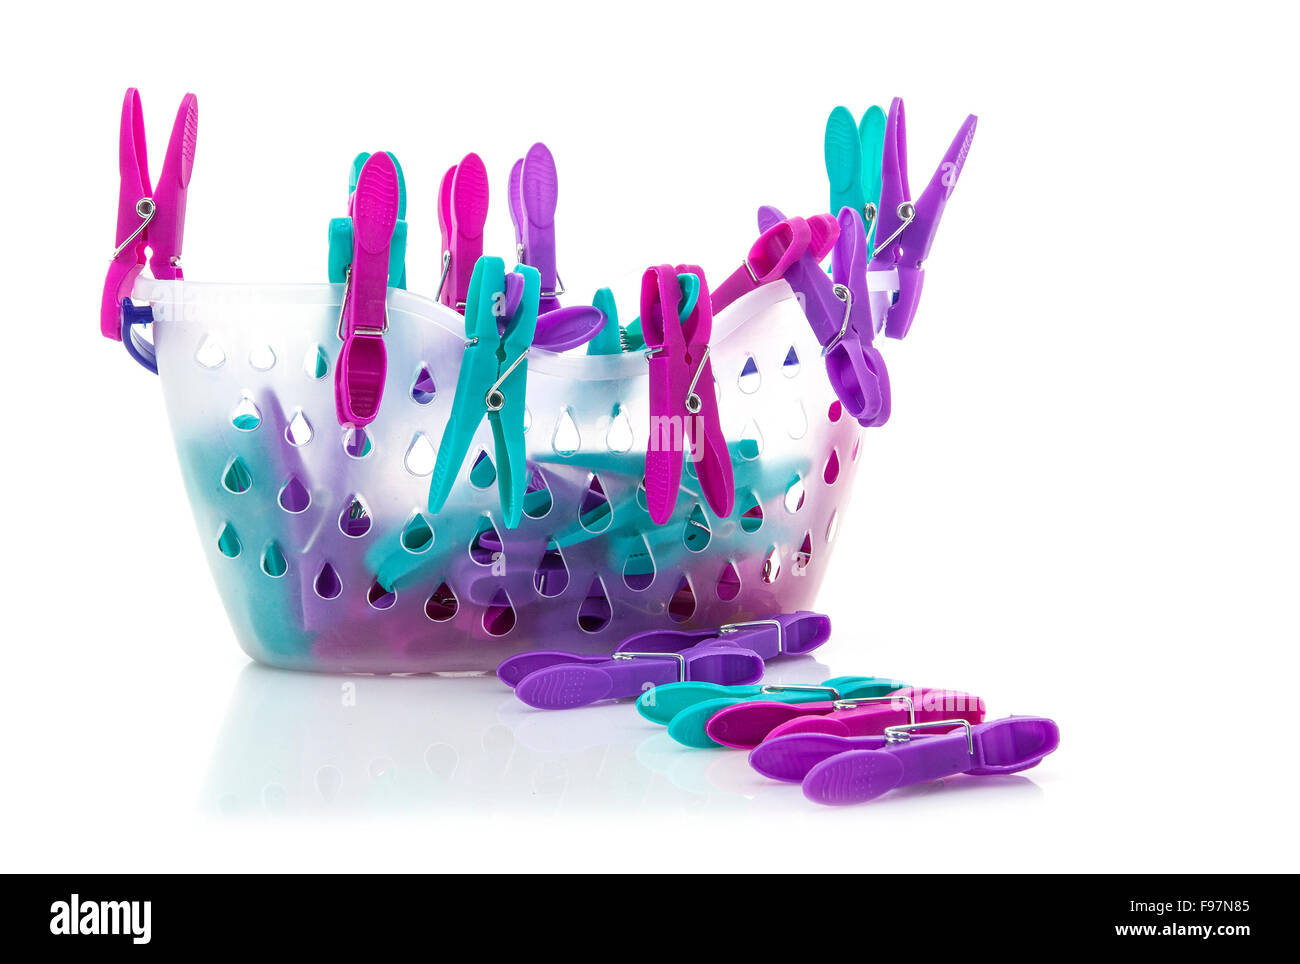 Colorful basket of pegs on white background Stock Photo